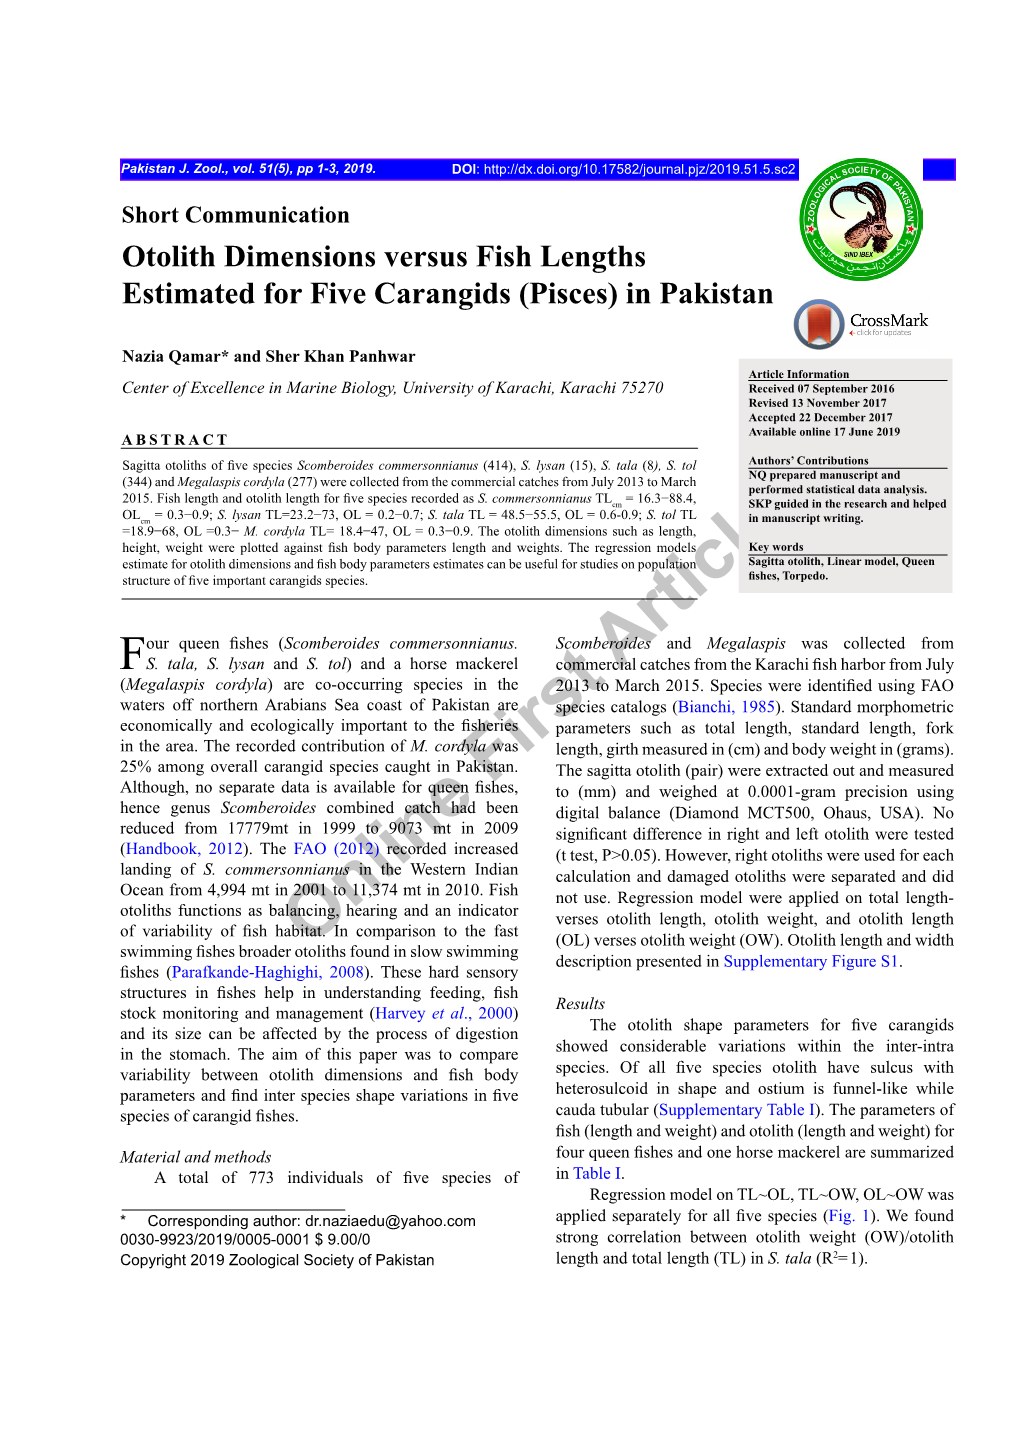 Otolith Dimensions Versus Fish Lengths Estimated for Five Carangids (Pisces) in Pakistan